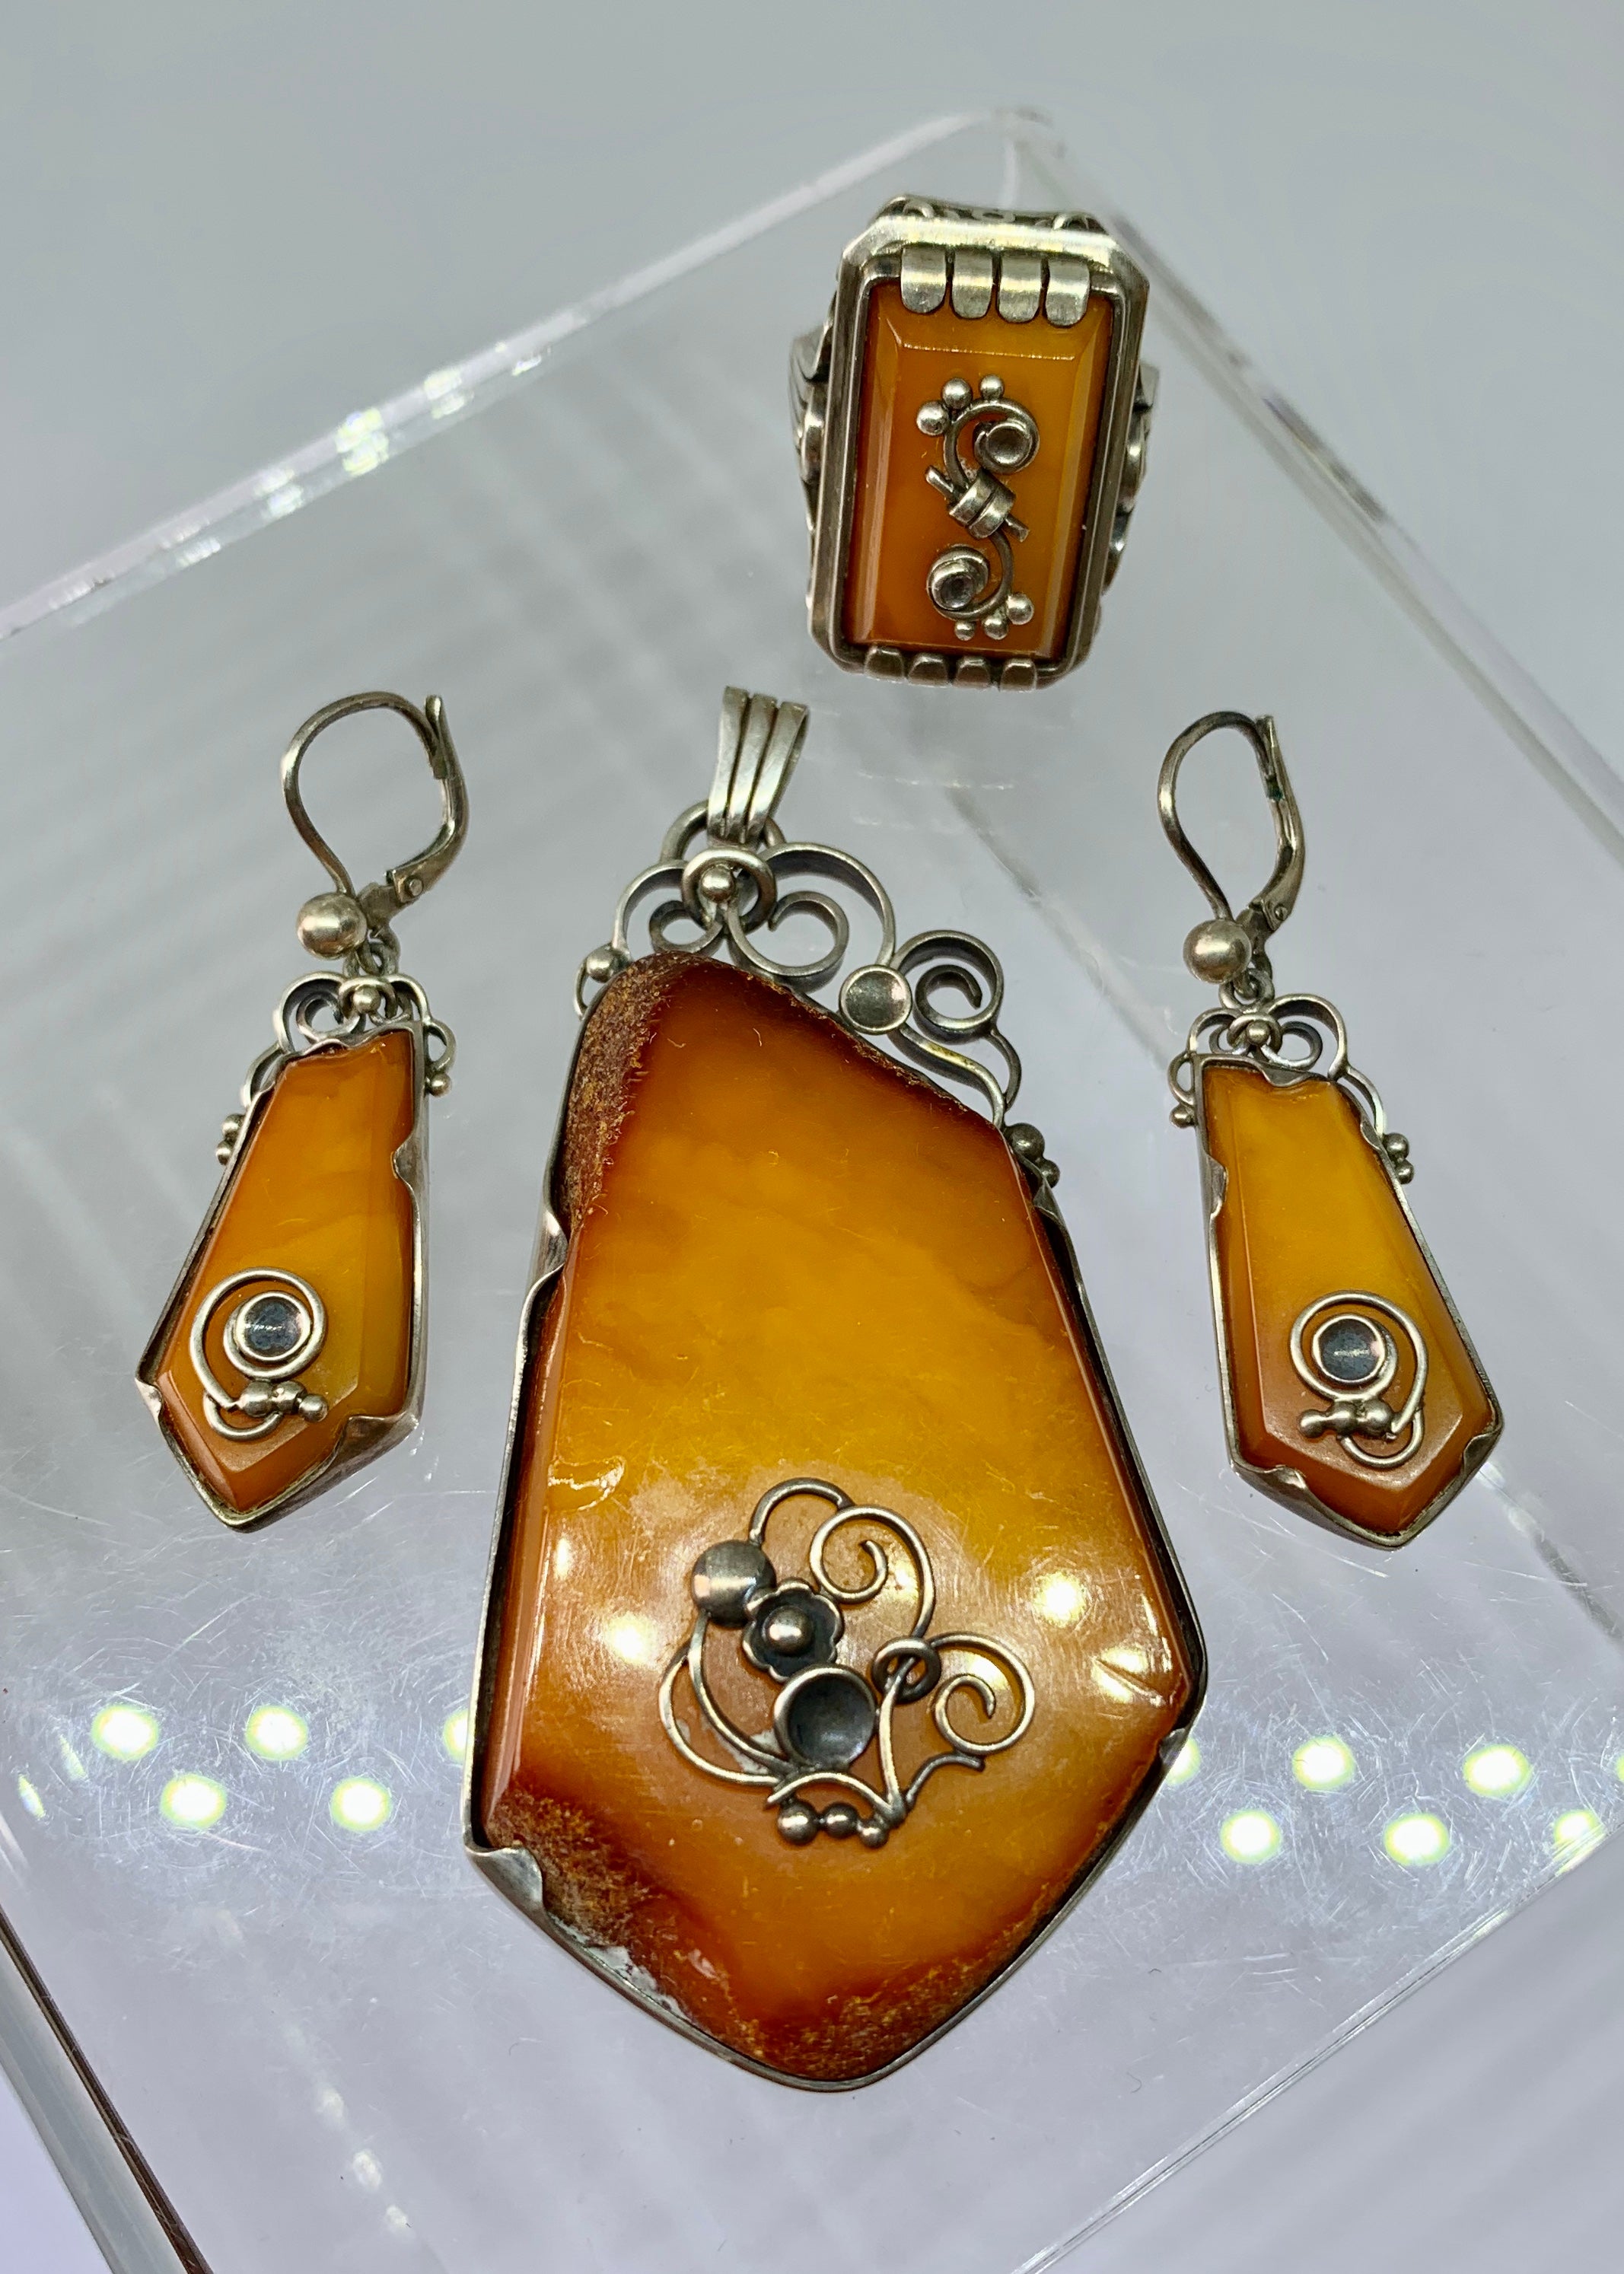 This is a magnificent Butterscotch Egg Yolk Amber and Silver suite of Pendant, Ring and Earrings.  The antique jewelry suite dates to the Art Nouveau - Art Deco to Mid-Century period.  The pieces are of extraordinary beauty and design.  The amber is